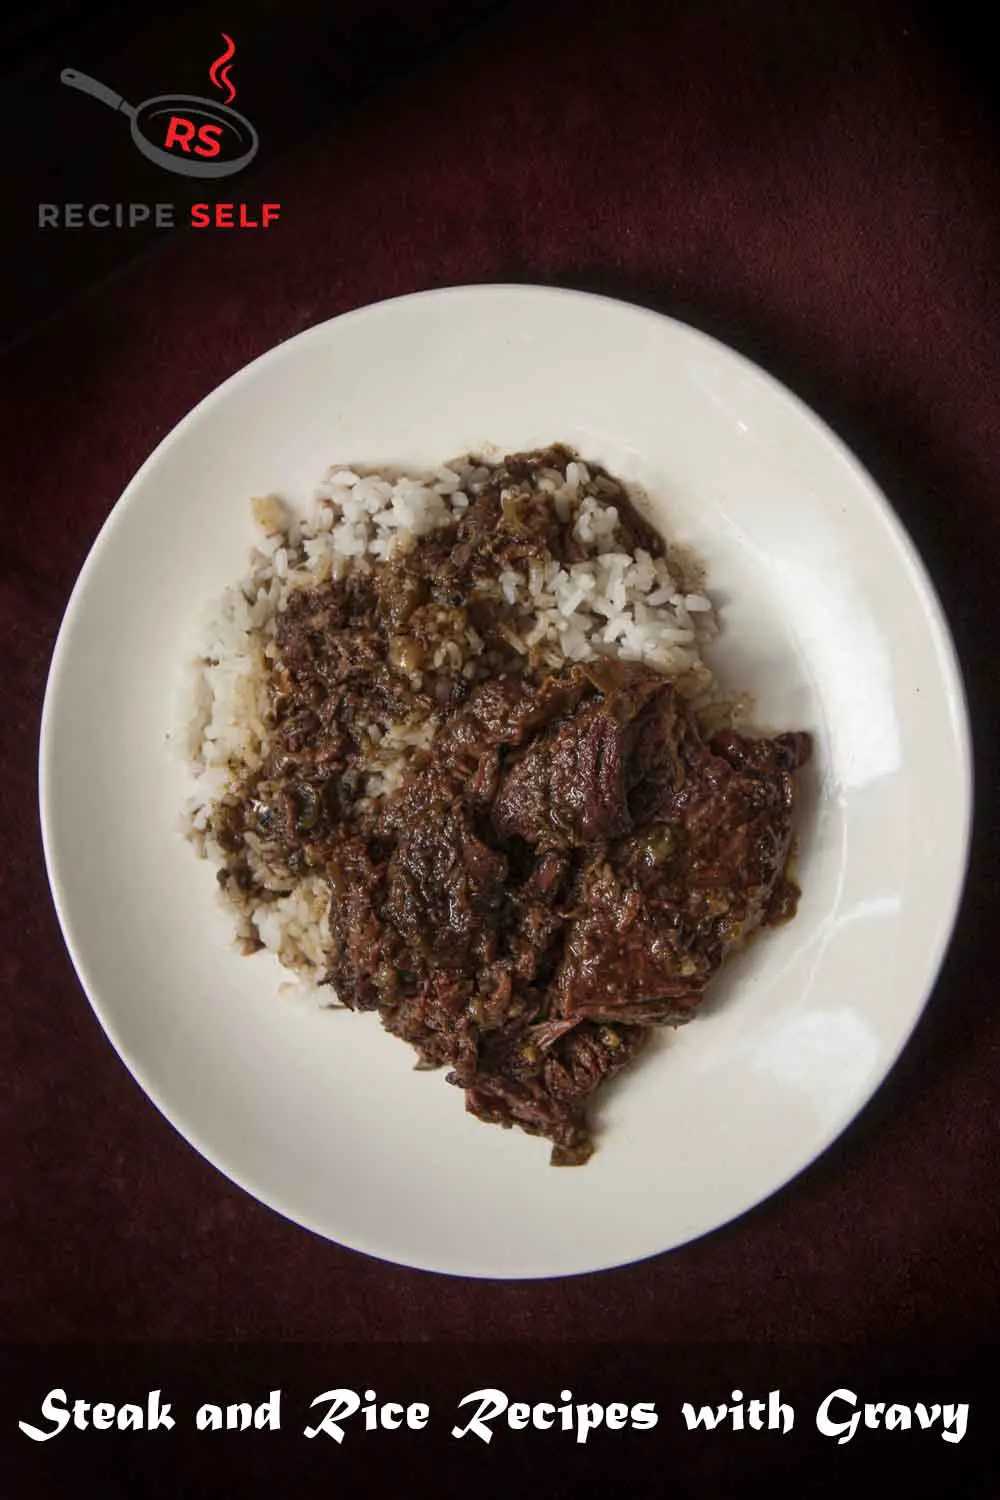 Steak and Rice Recipes with Gravy